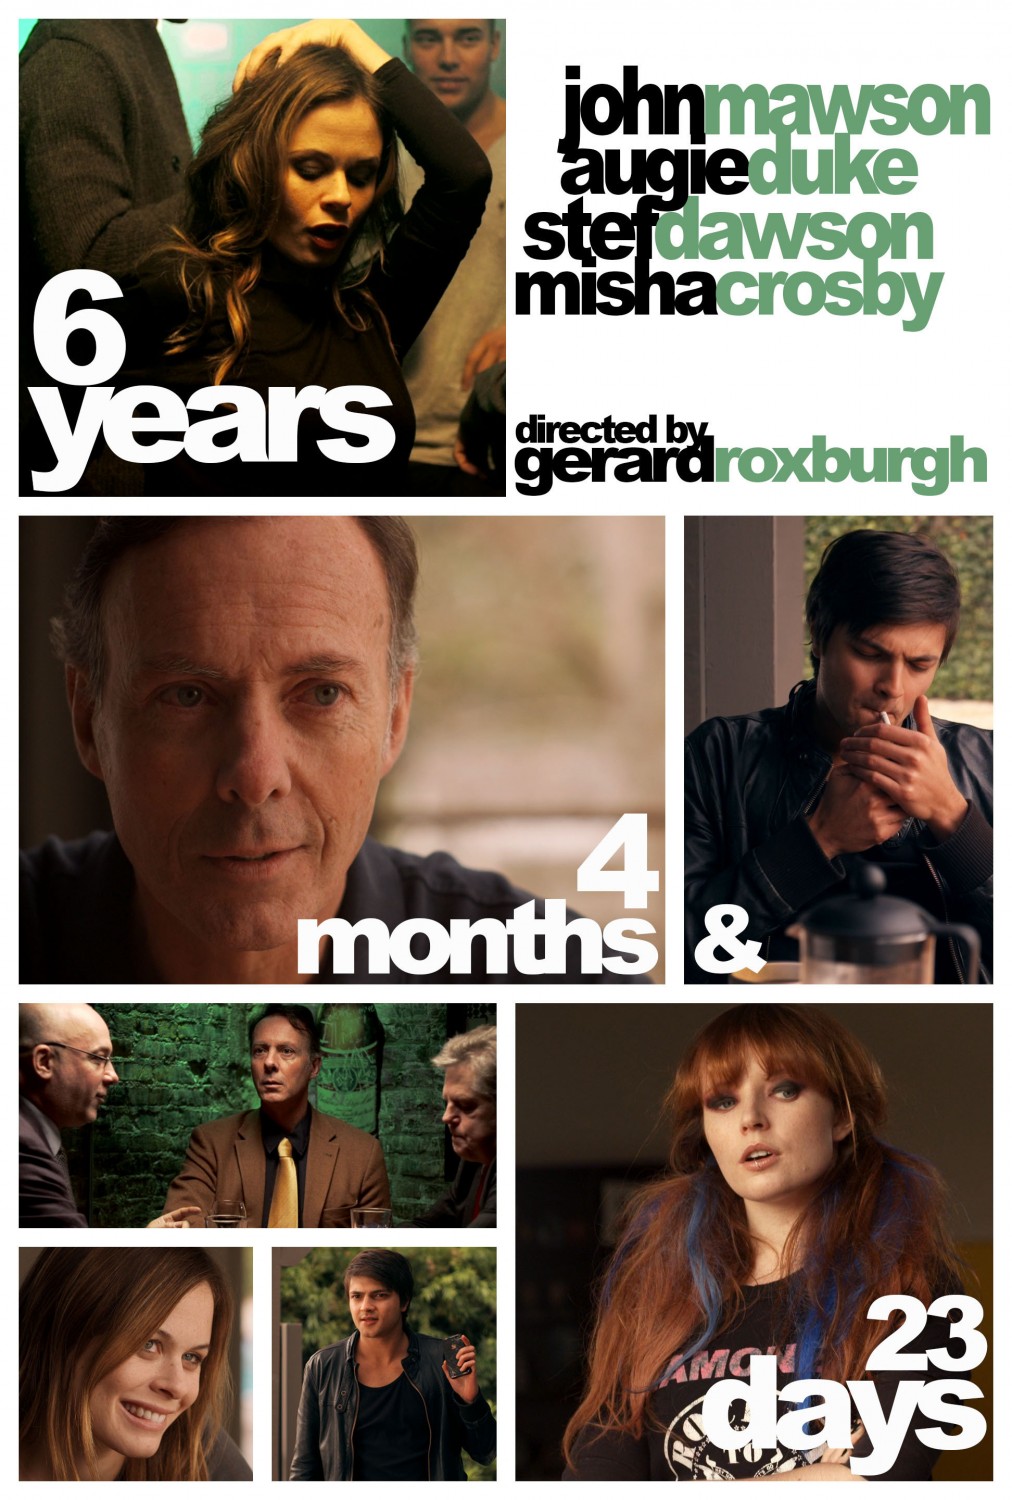 Extra Large Movie Poster Image for 6 Years, 4 Months & 23 Days